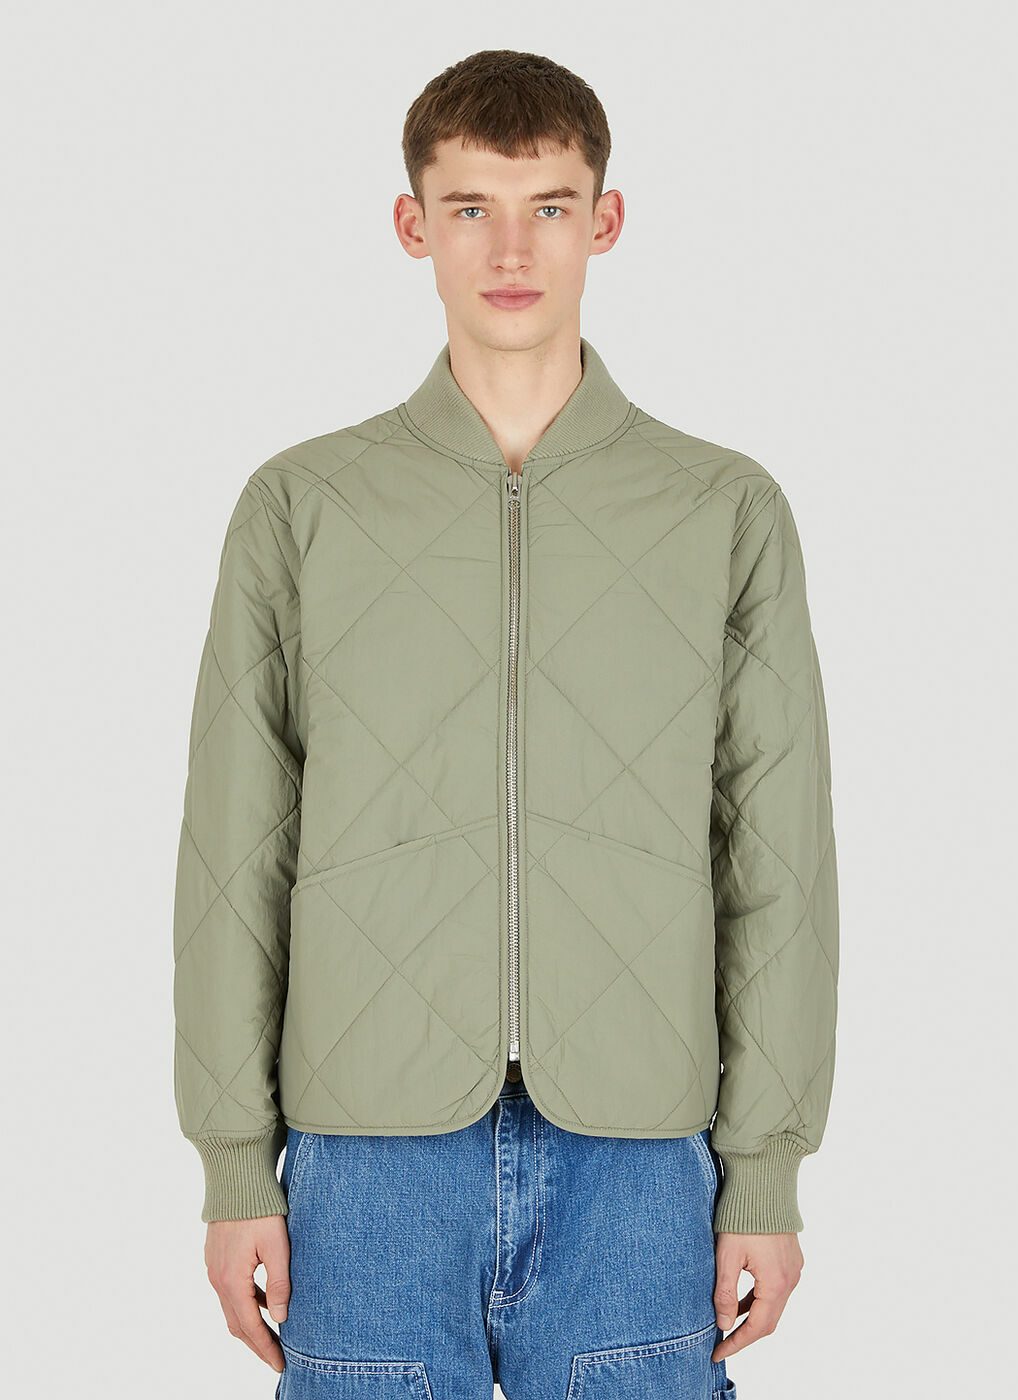 Dice Quilted Bomber Jacket in Khaki Stussy